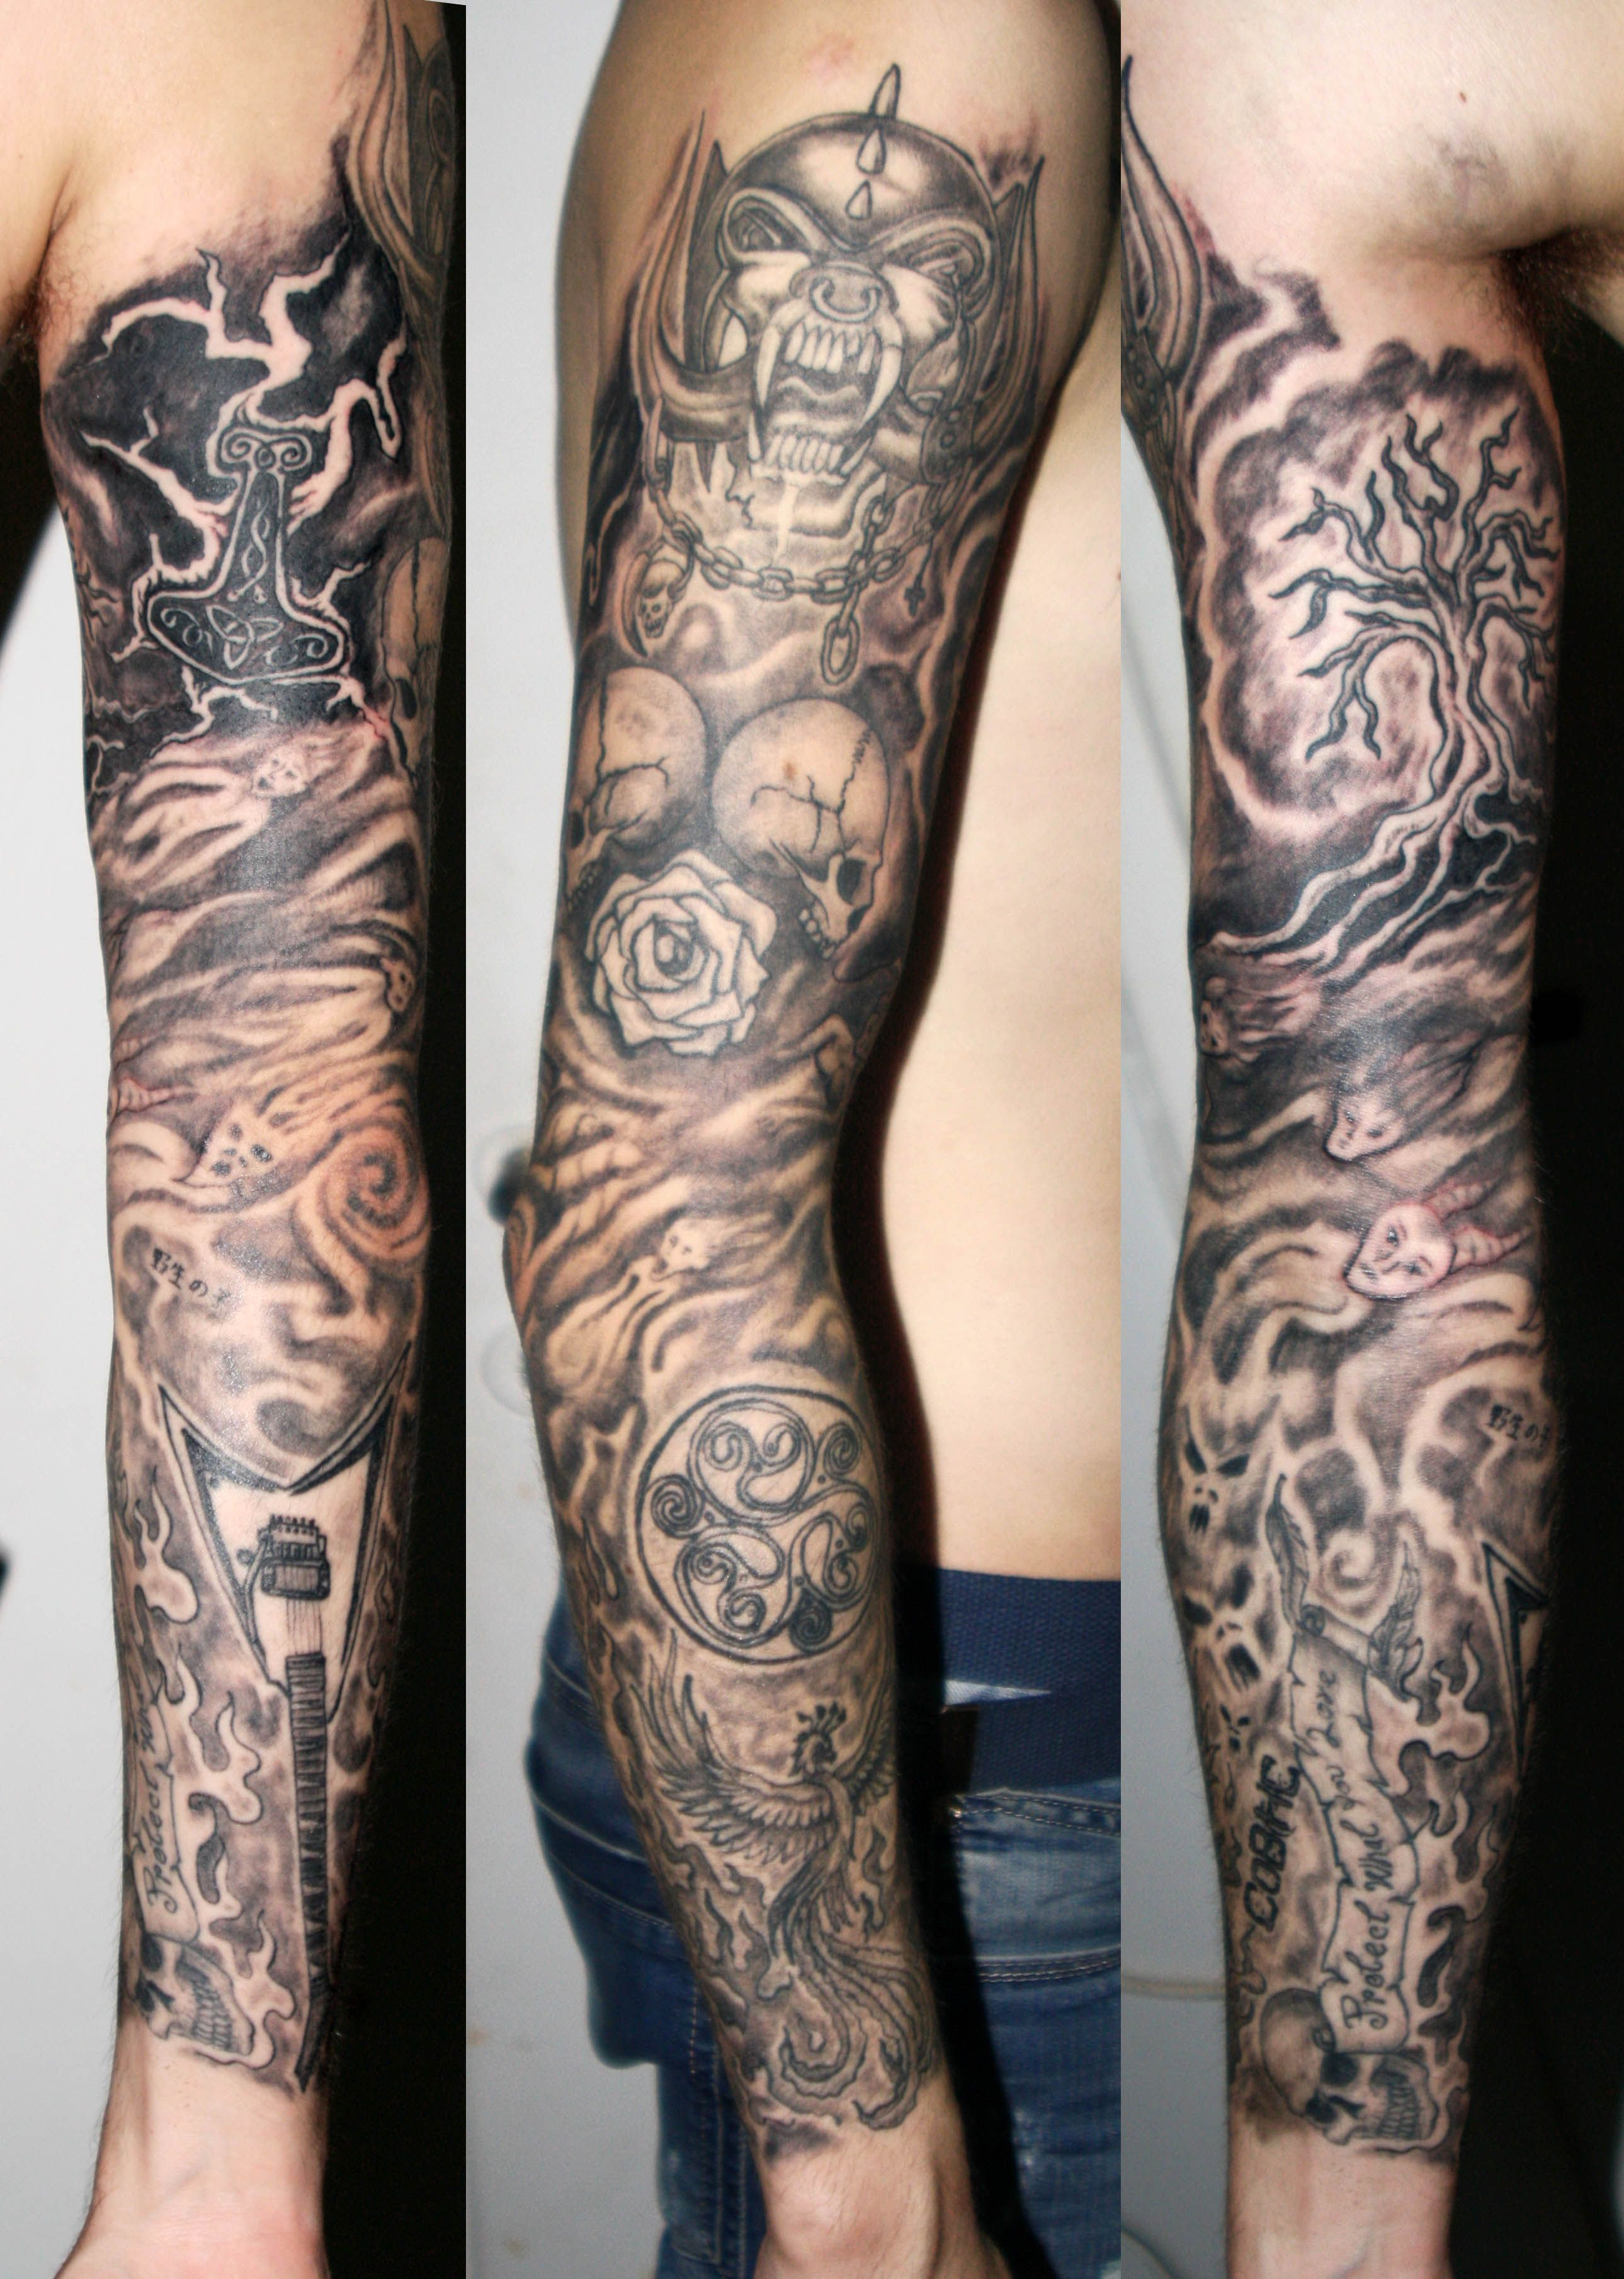 Metal Band Inspired Tattoo Sleeve Tattoos Valhalla Tattoo intended for size 2579 X 3619